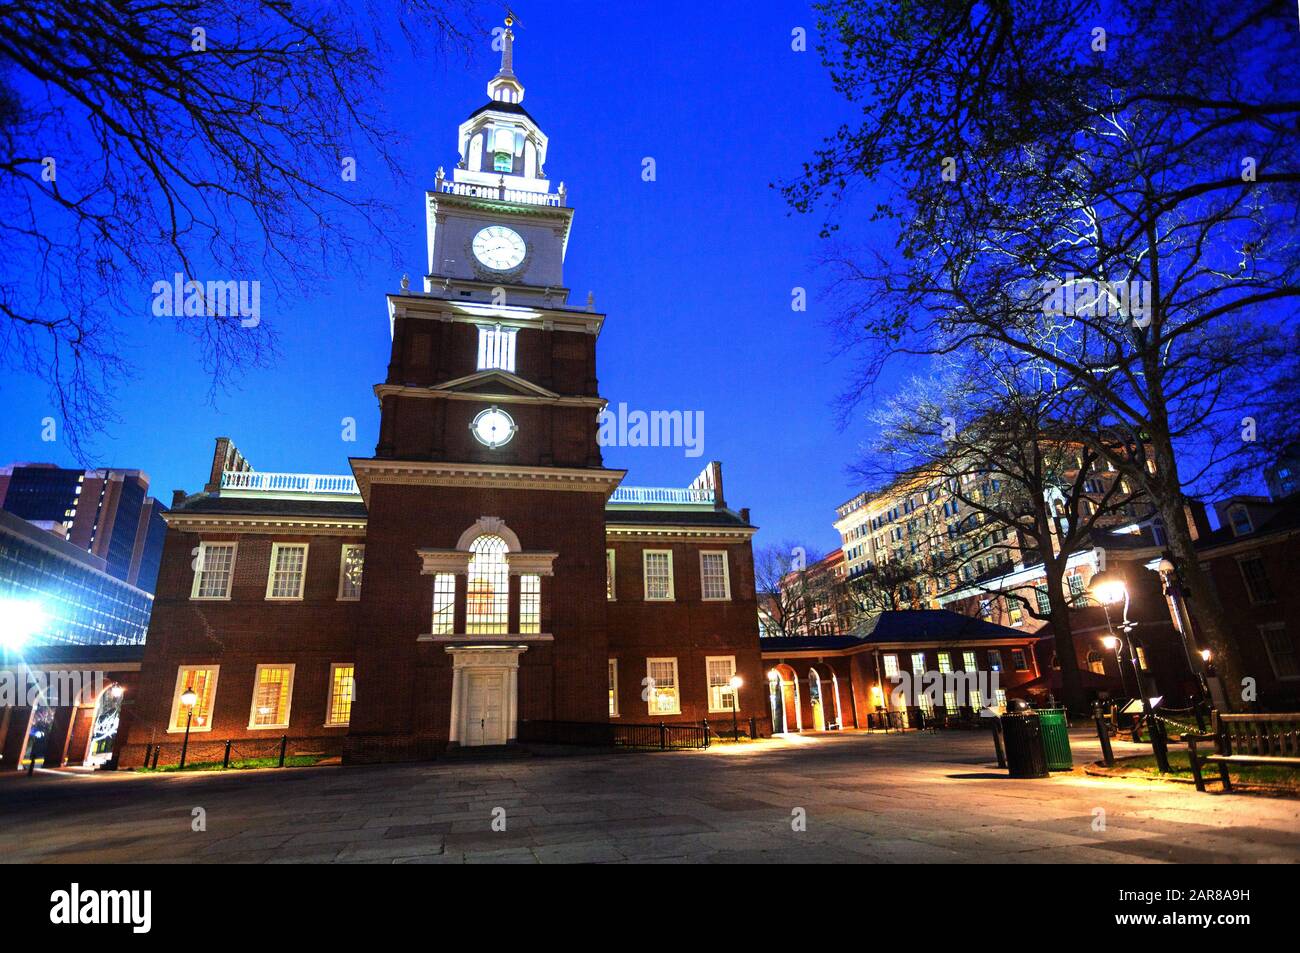 Illuminated Independence Square and Hall at night during winter in Philadelphia building where the United States Constitution was signed Stock Photo